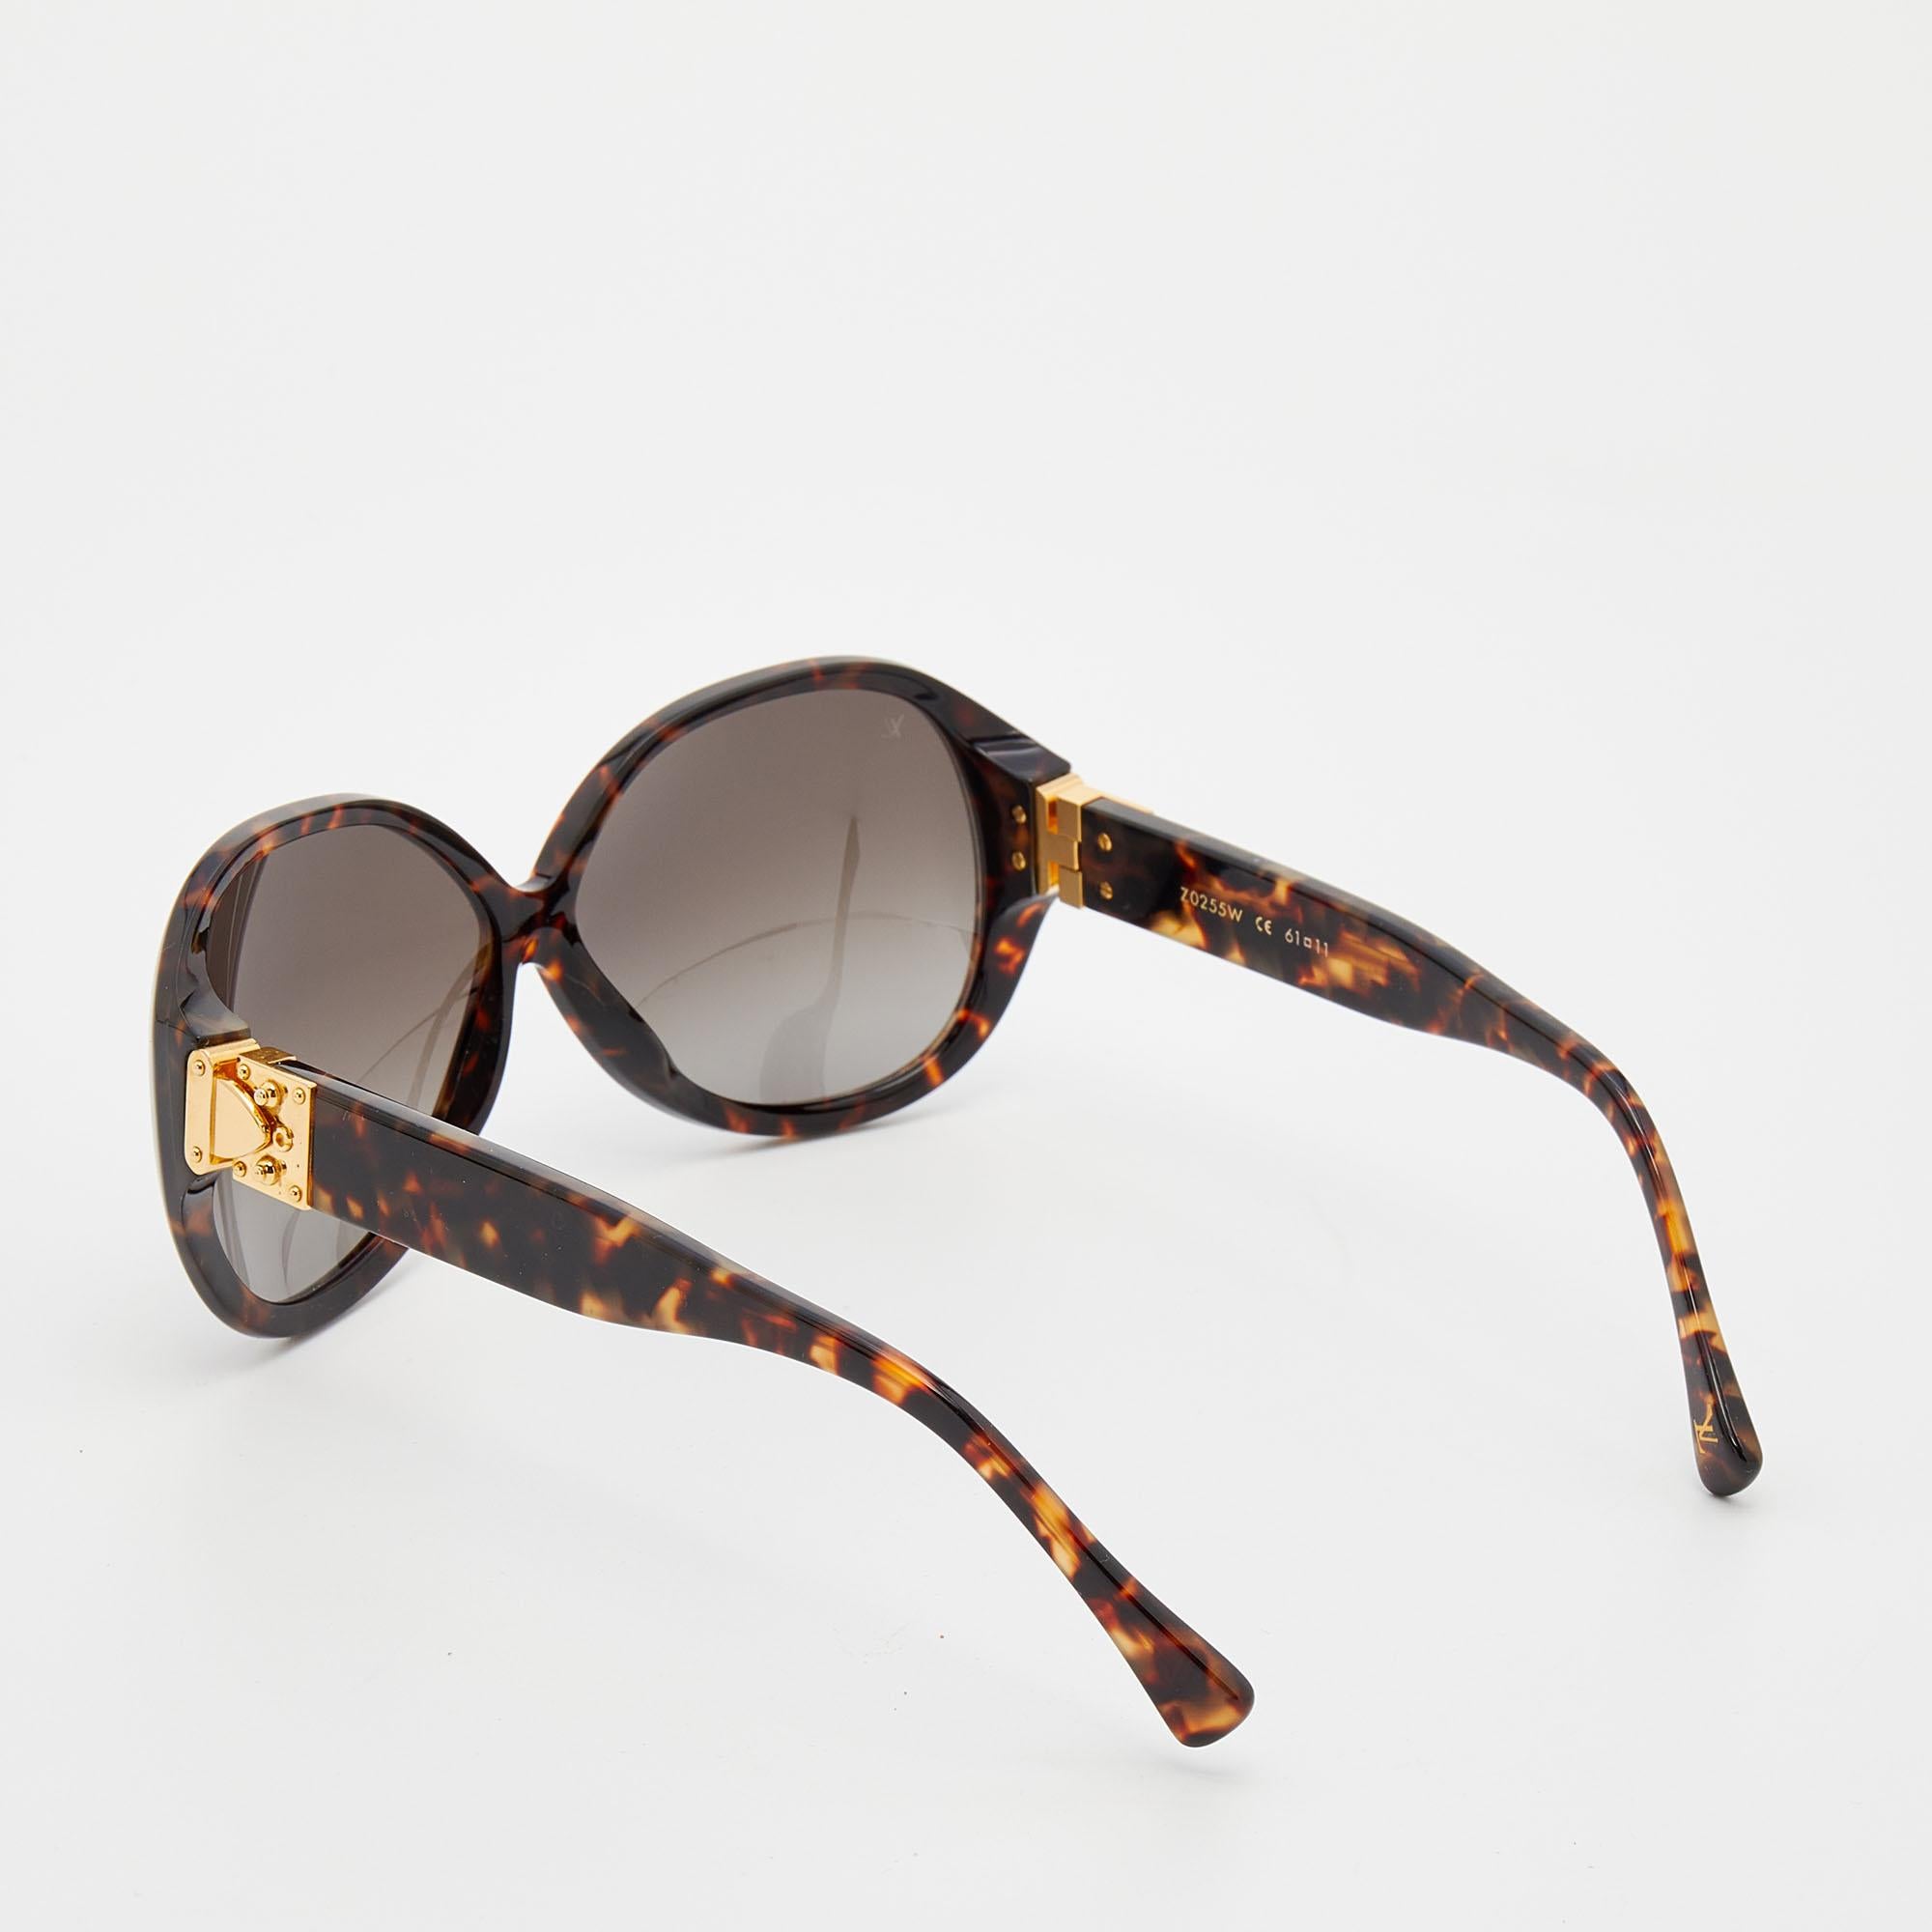 This pair of Louis Vuitton sunglasses is an ideal pick for a day out in the sun. Set in a sturdy havana frame, the glasses come with brown gradient lenses and signature lock detailing as the hinges.

